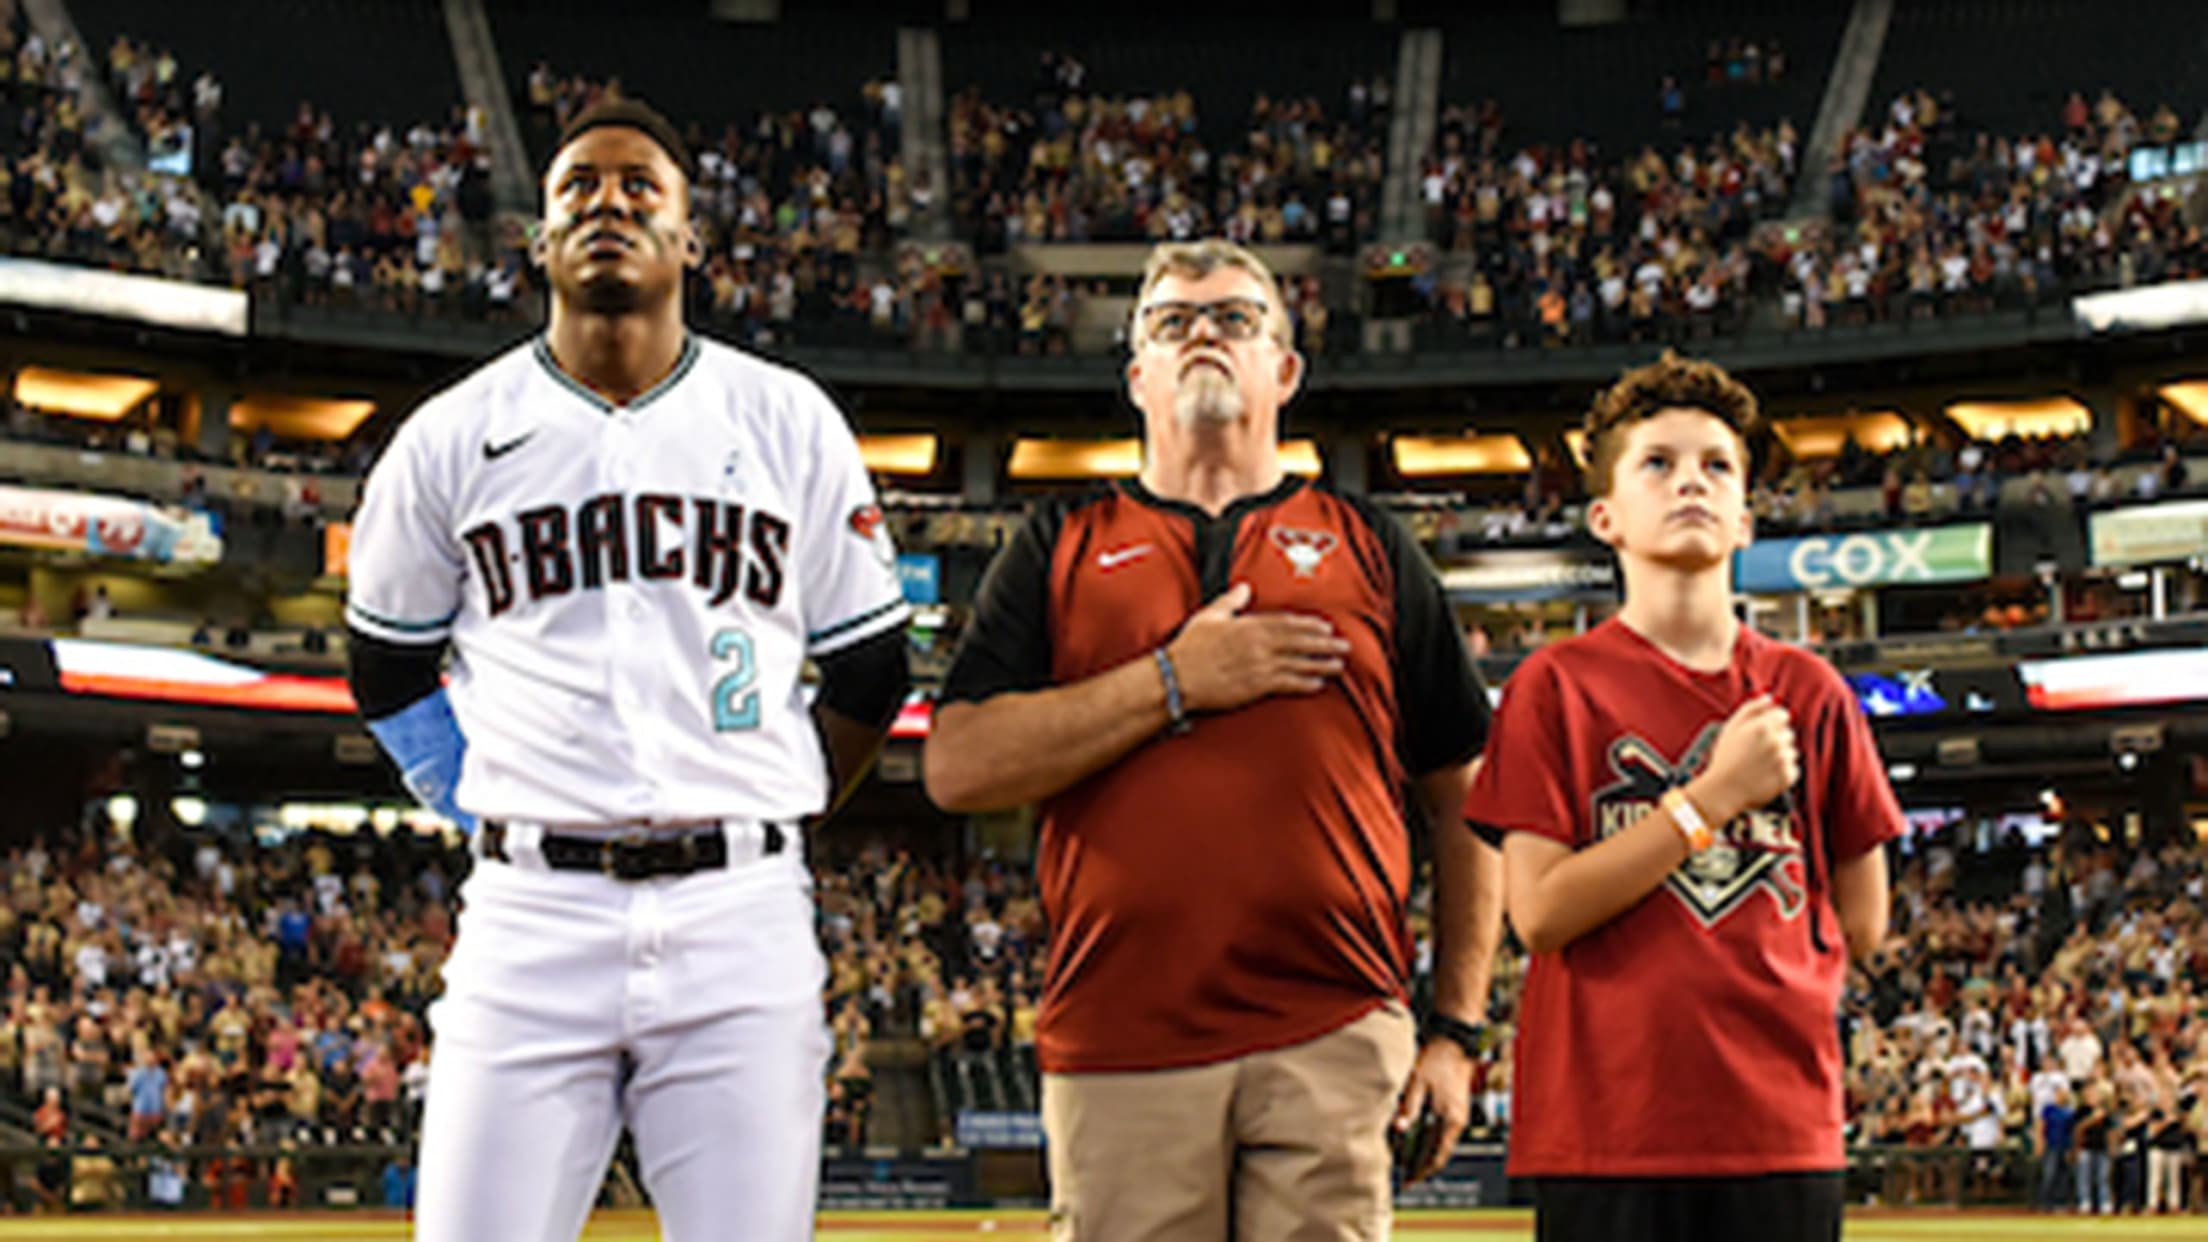 Diamondbacks get new uniforms for Mother's Day, Father's Day